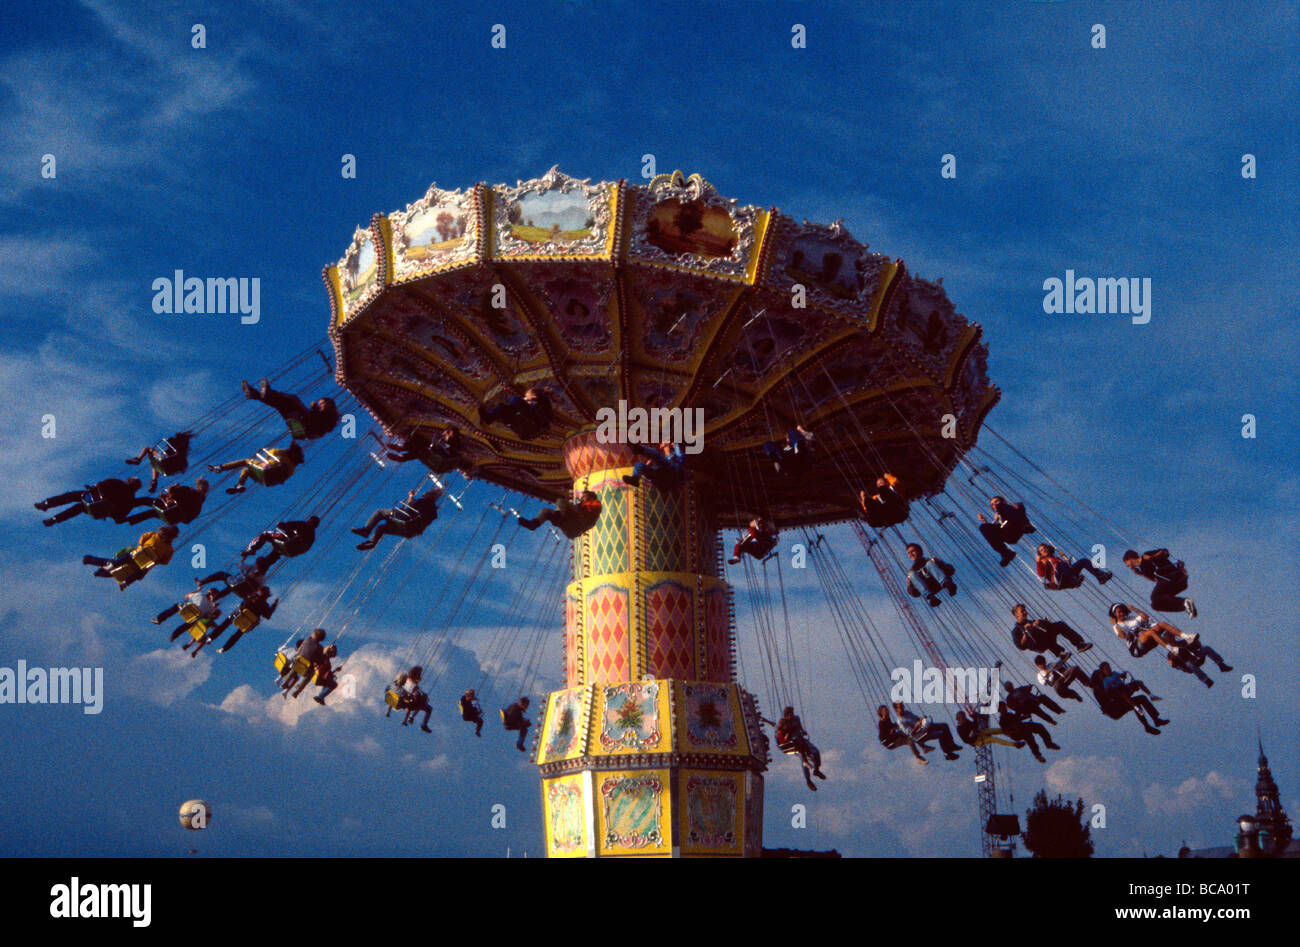 Funfair with people swinging out from rotating carousel Stock Photo